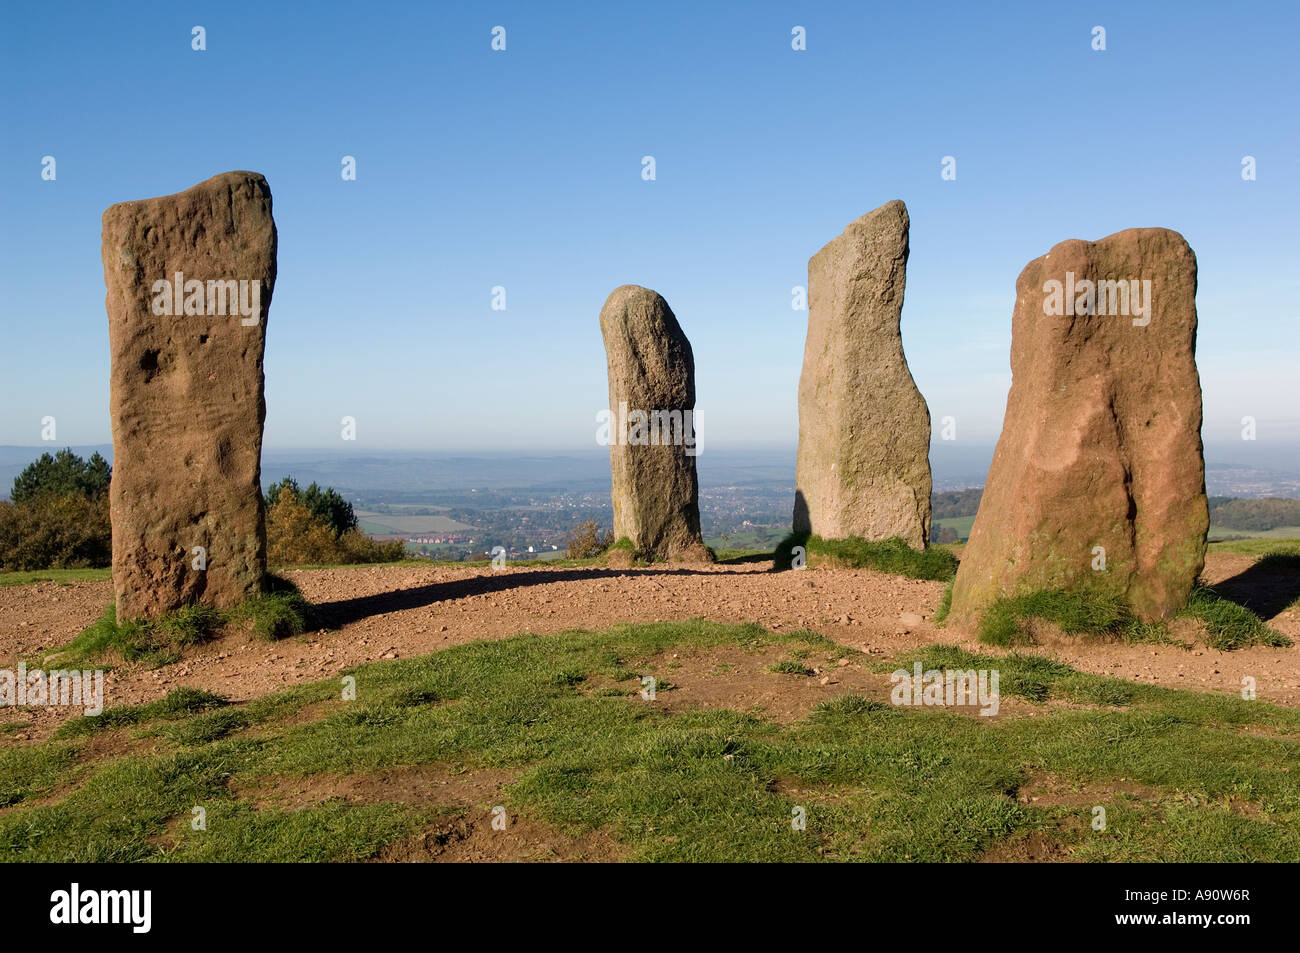 Four stones Clent worcestershire Stock Photo